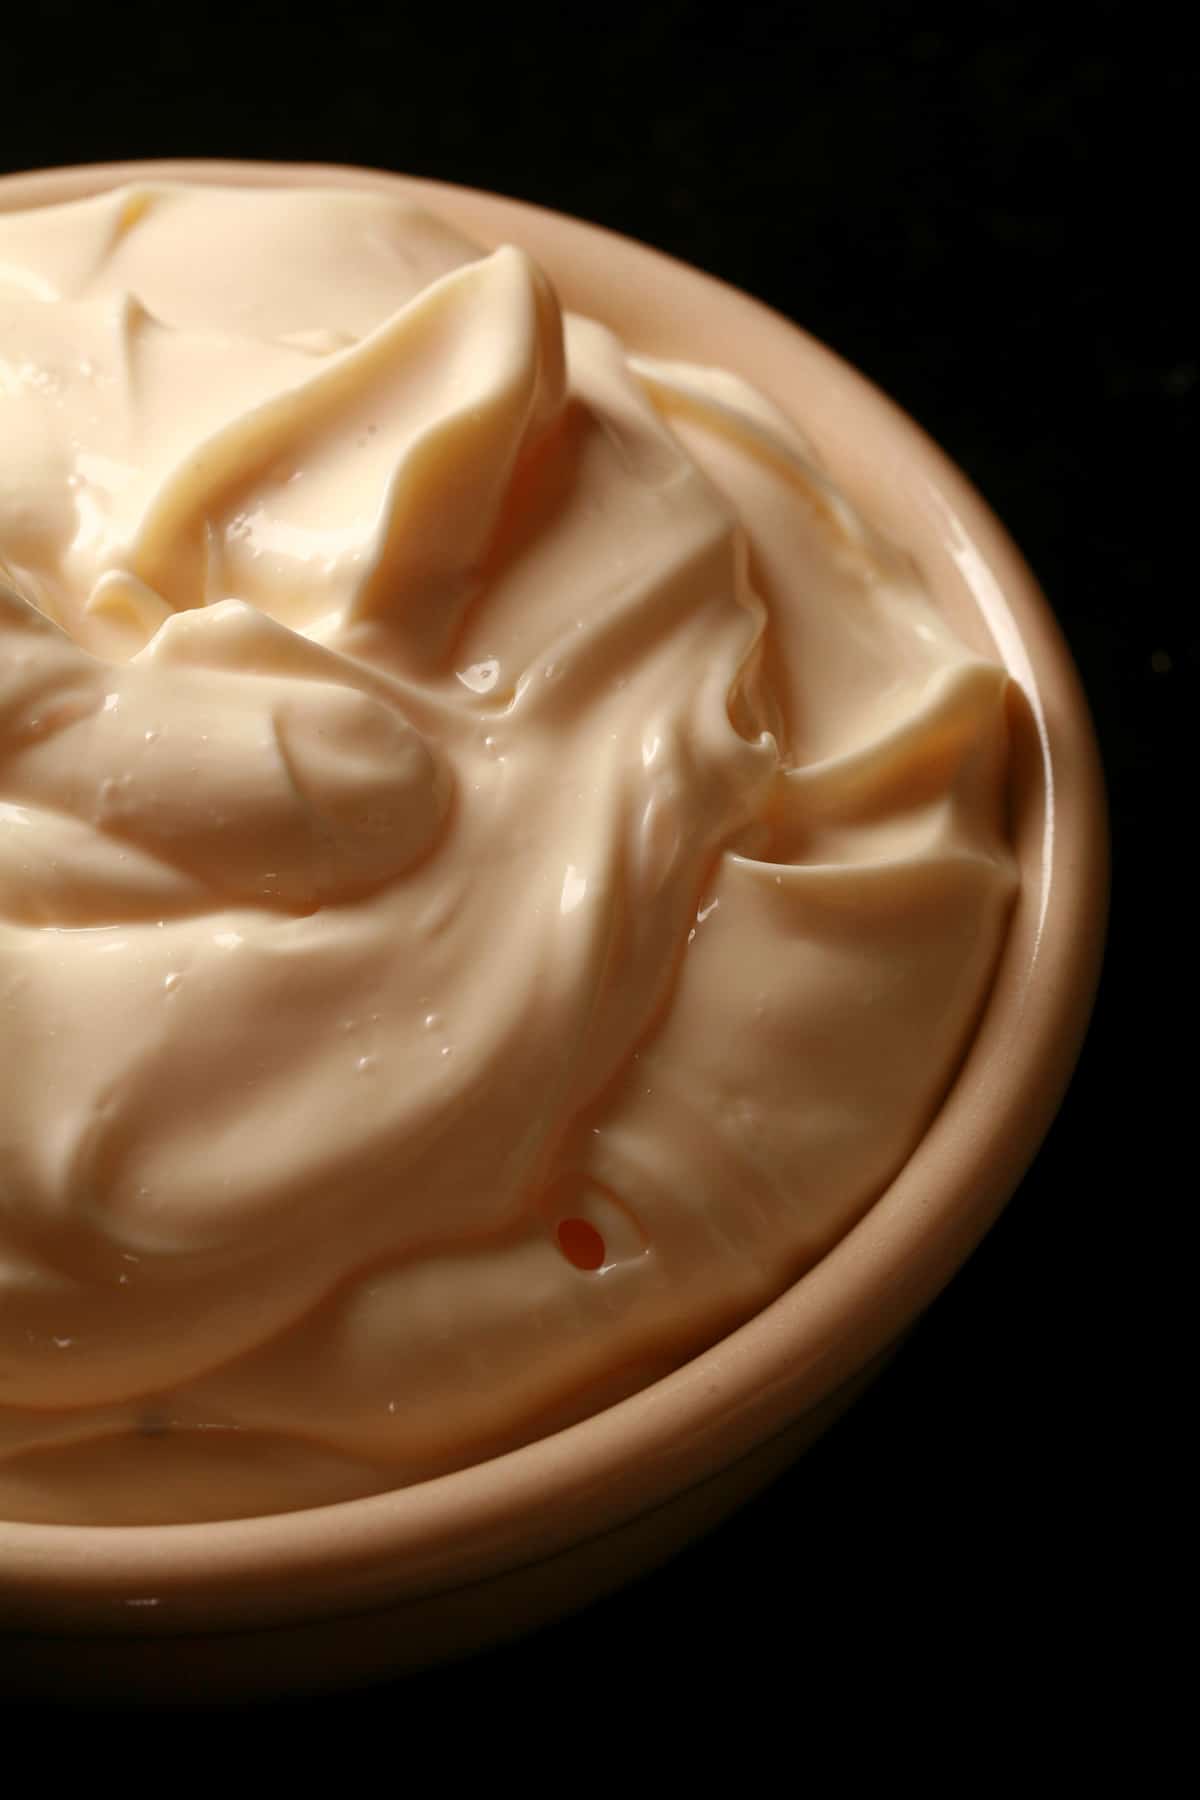 A close up view of a bowl of cold smoked mayonnaise.